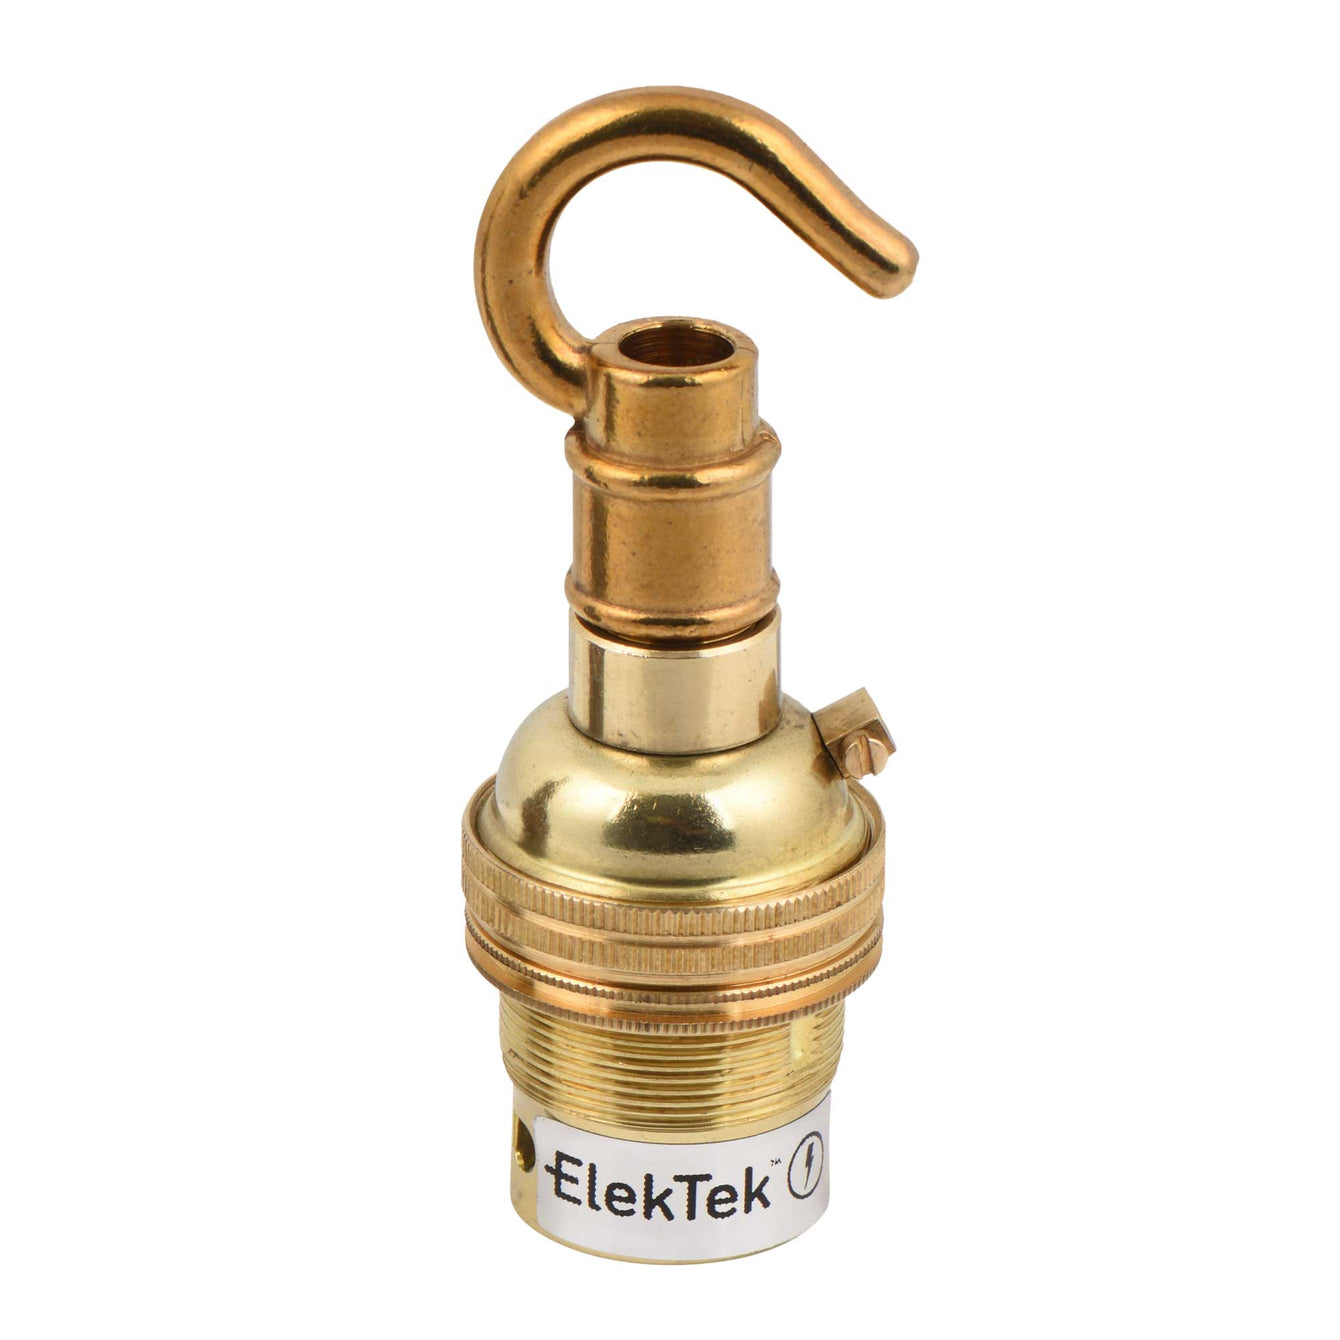 ElekTek Lamp Holder Bayonet Cap B22 Unswitched With Shade Ring and Hook Solid Brass Antique Brass